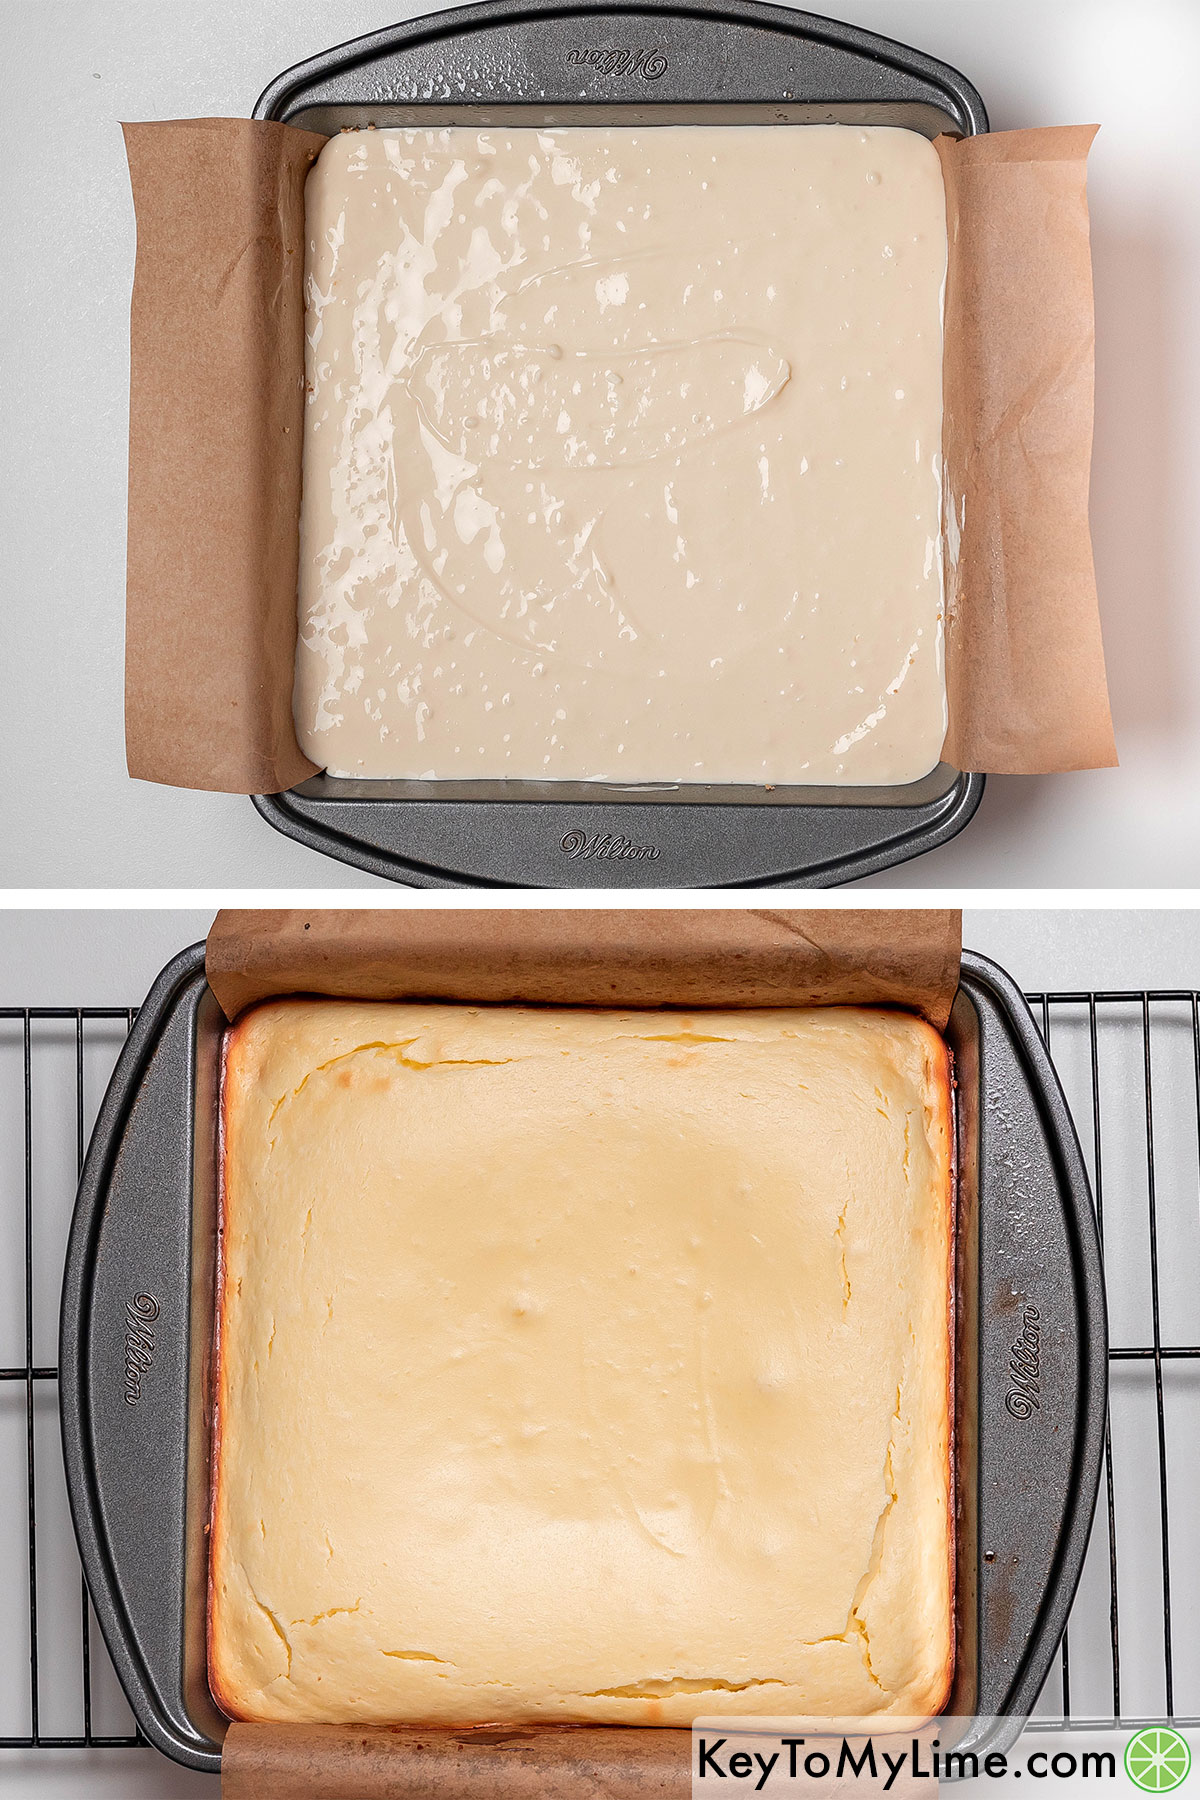 Baking in a preheated oven and removing once the edges are puffy and the center is set.